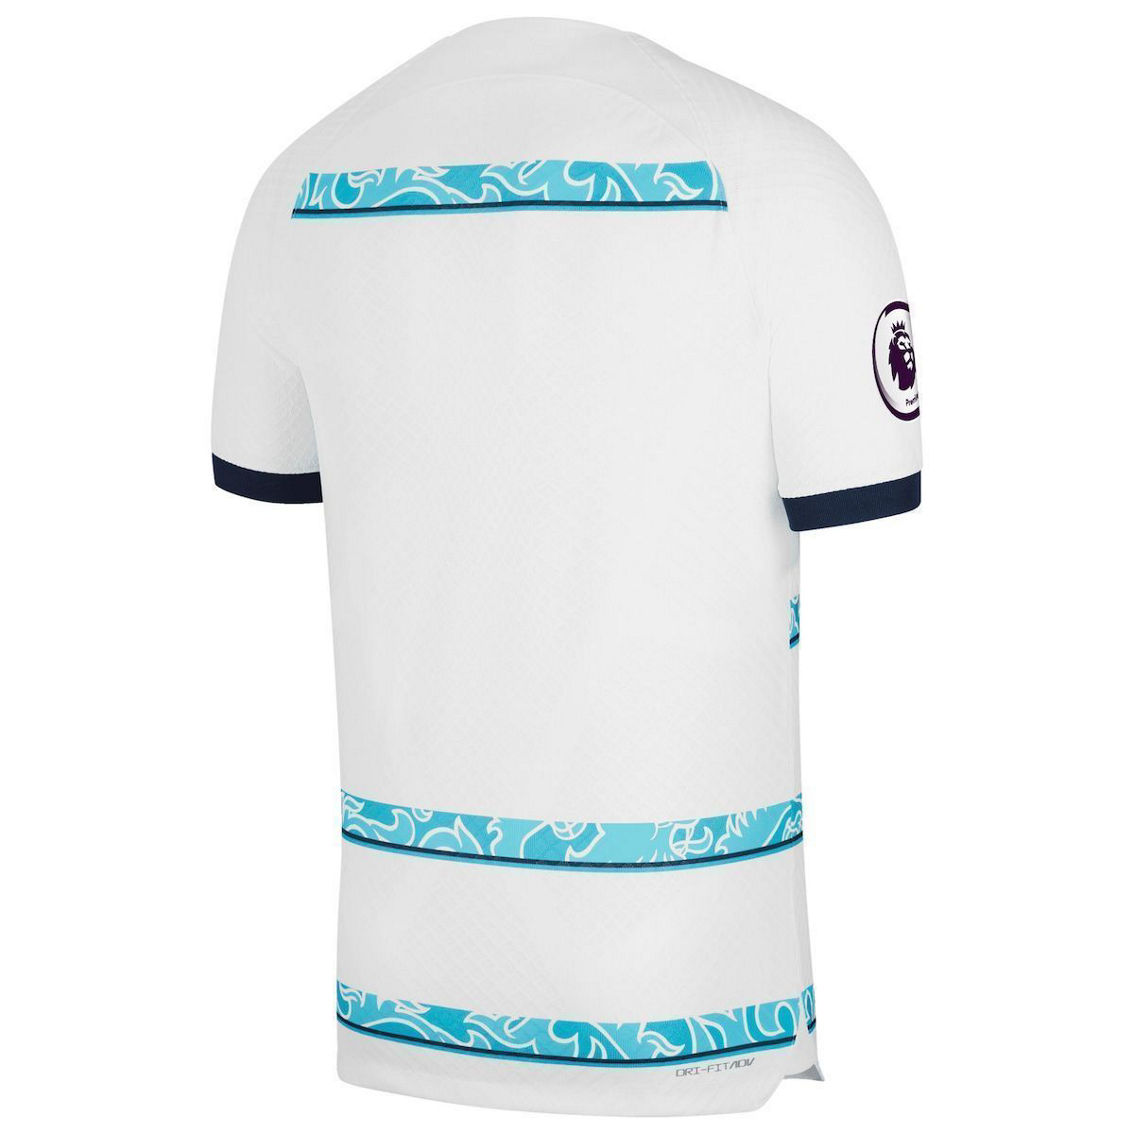 Nike Men's White Chelsea 2022/23 Away Vapor Match Authentic Blank Jersey - Image 4 of 4